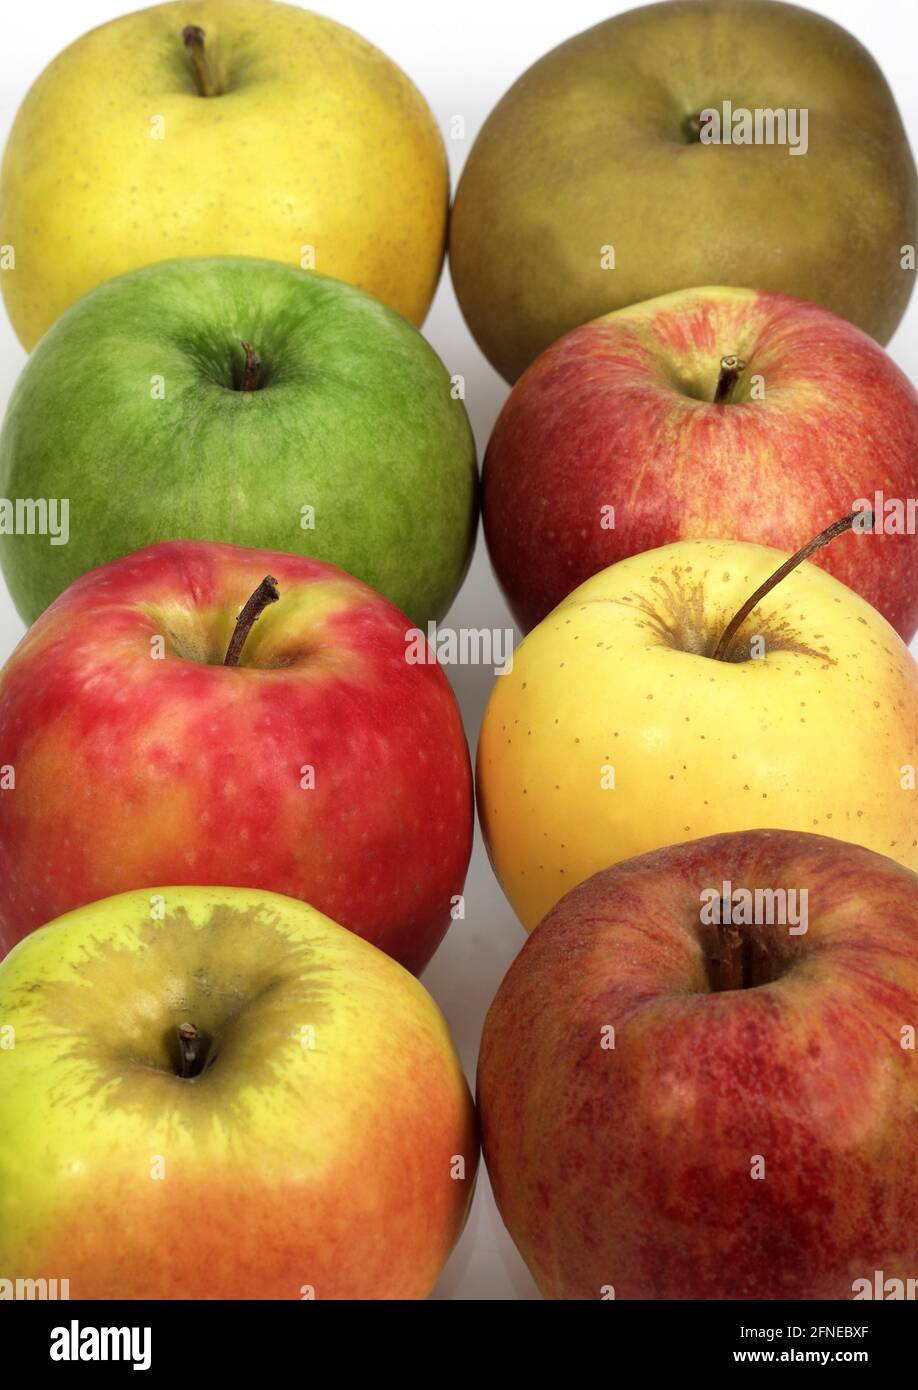 Malus domestica, cultivated apple, apple, apples, rose family, Apples, Calville, Canada, Golden, Granny Smith, Pink Lady, Royal Gala, Starling, malus Stock Photo